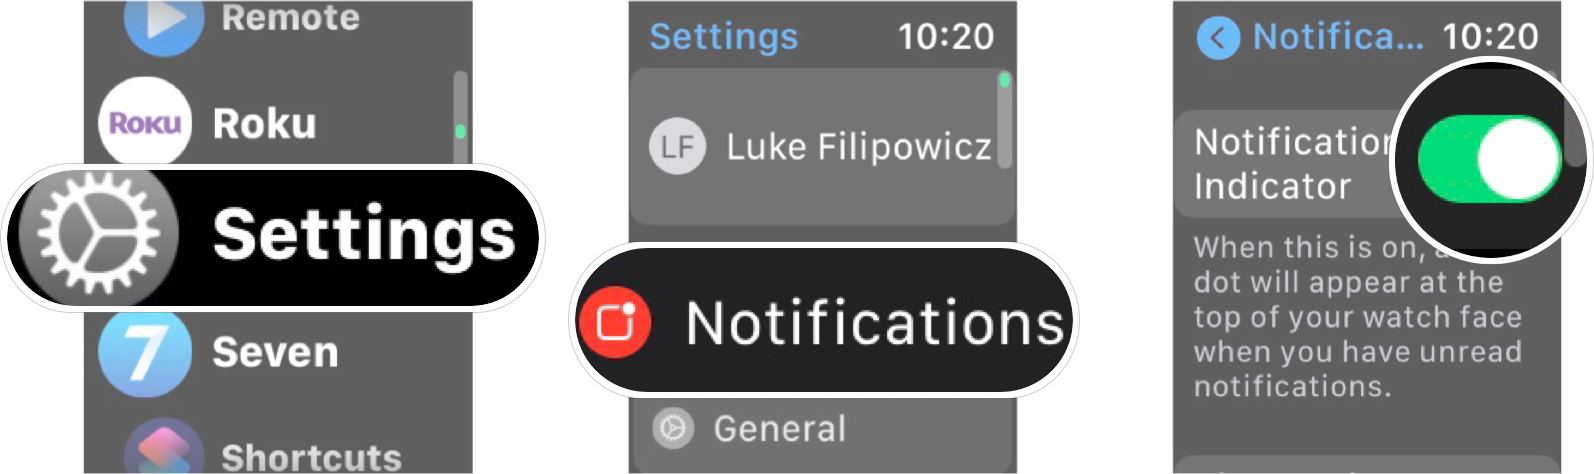 Managing Notifications On Apple Watch: Launch settings, tap notifications, and then tap the notifications indicator on/off switch.